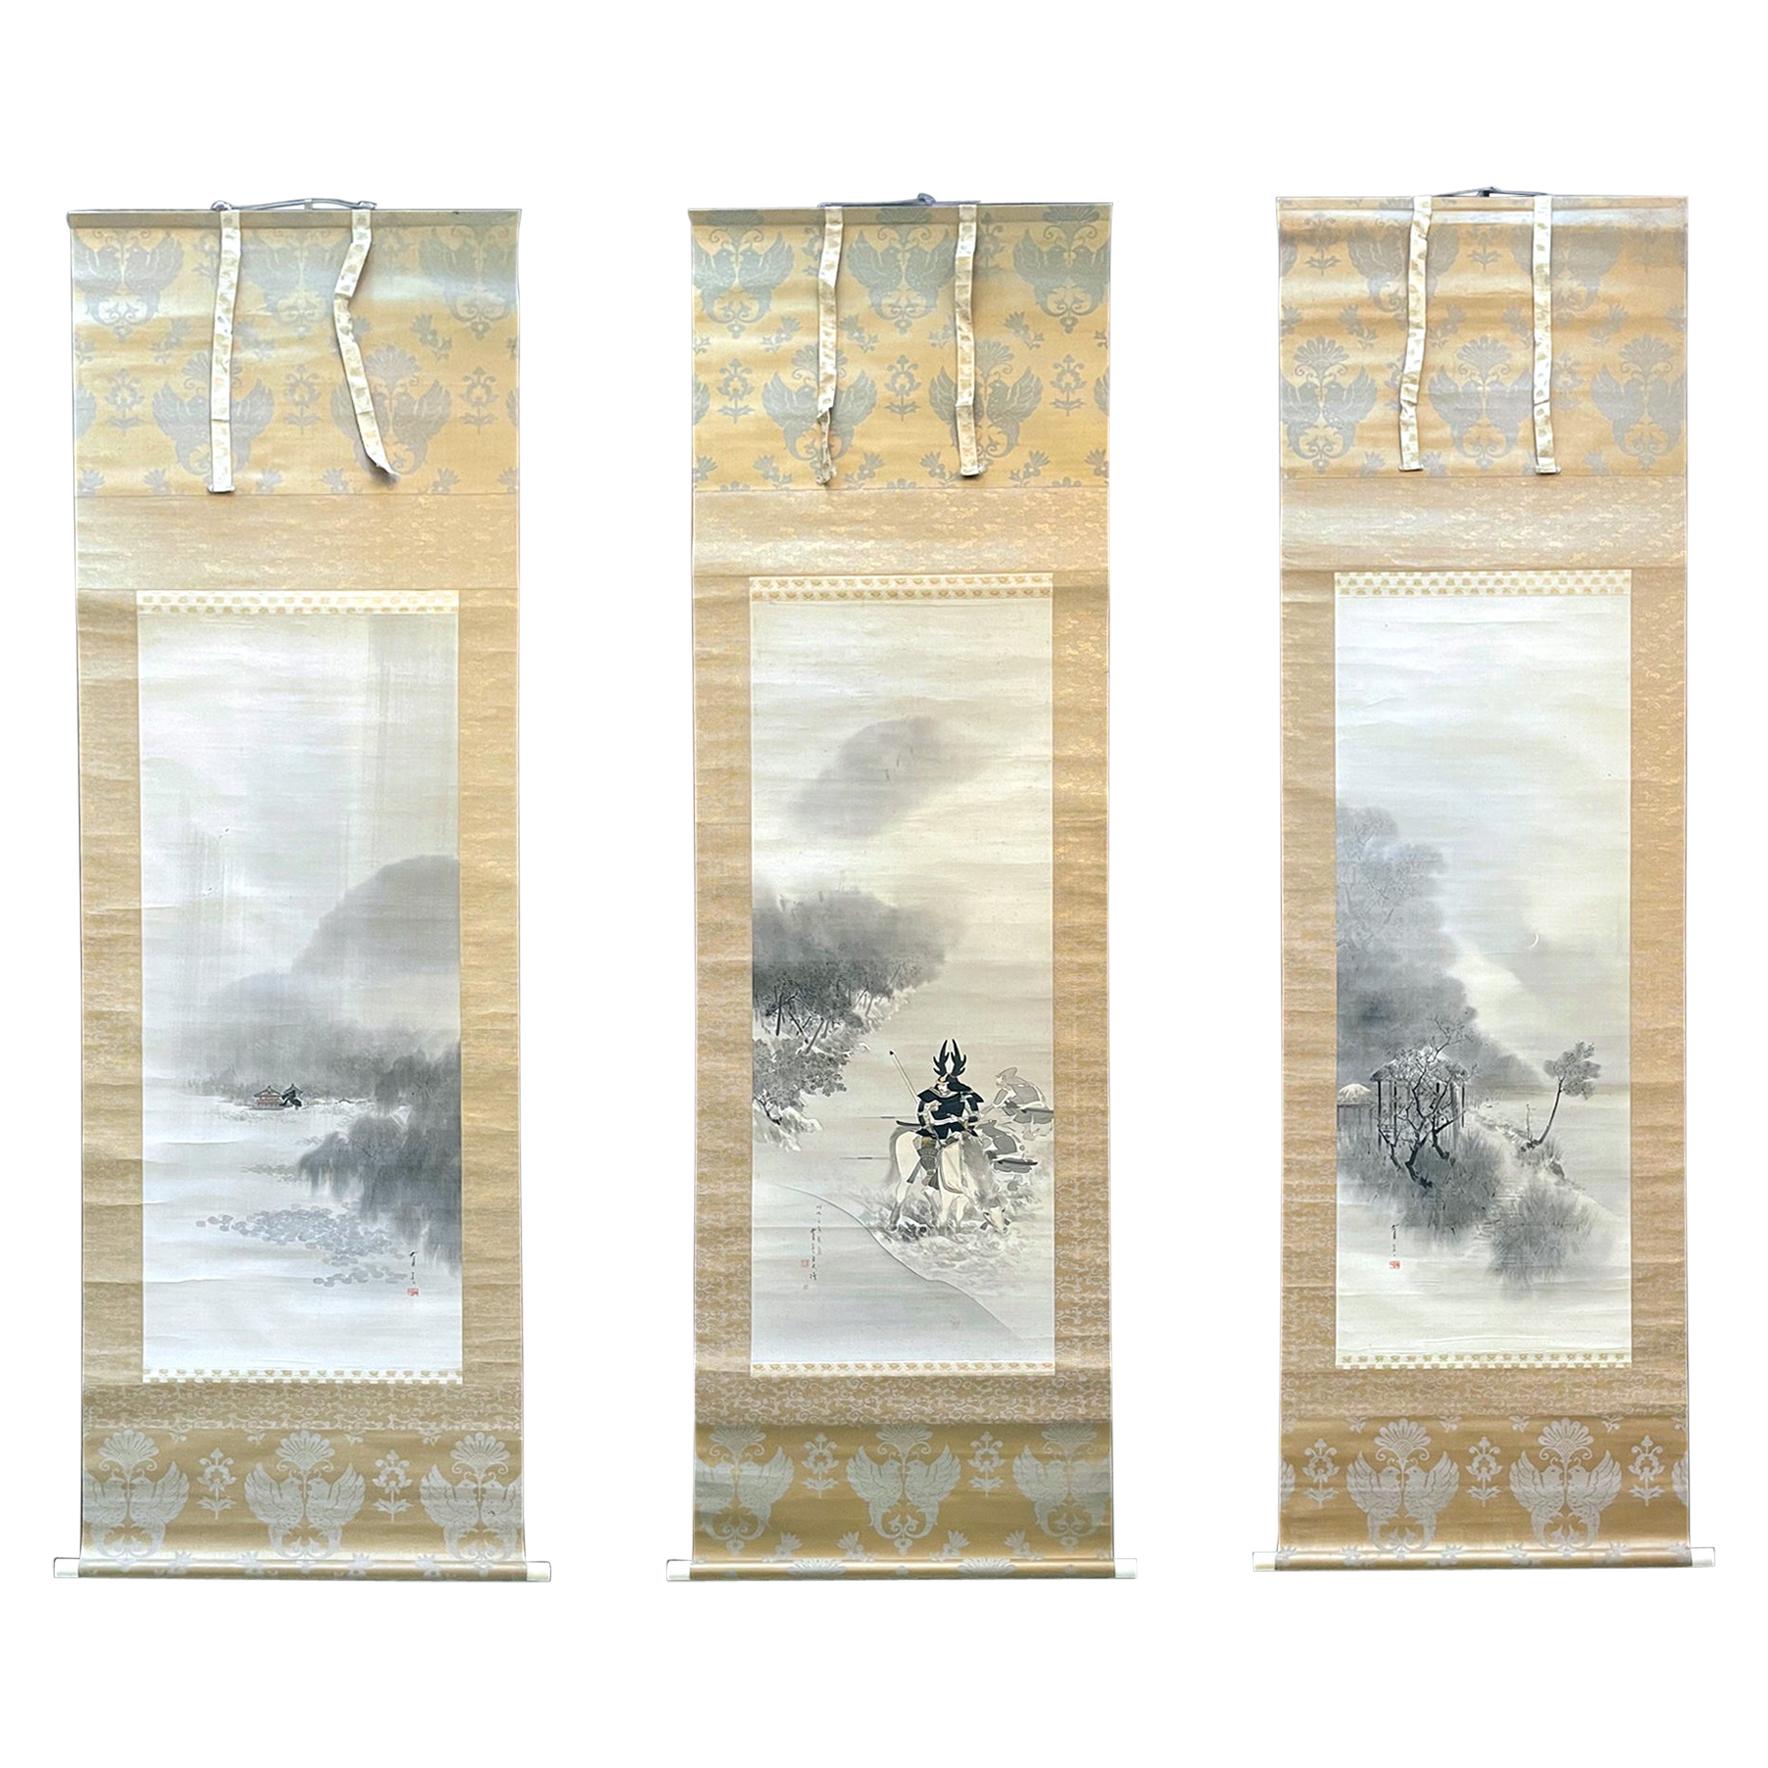 Rare Triptych Scroll Paintings by Watanabe Seitei Meiji Period For Sale